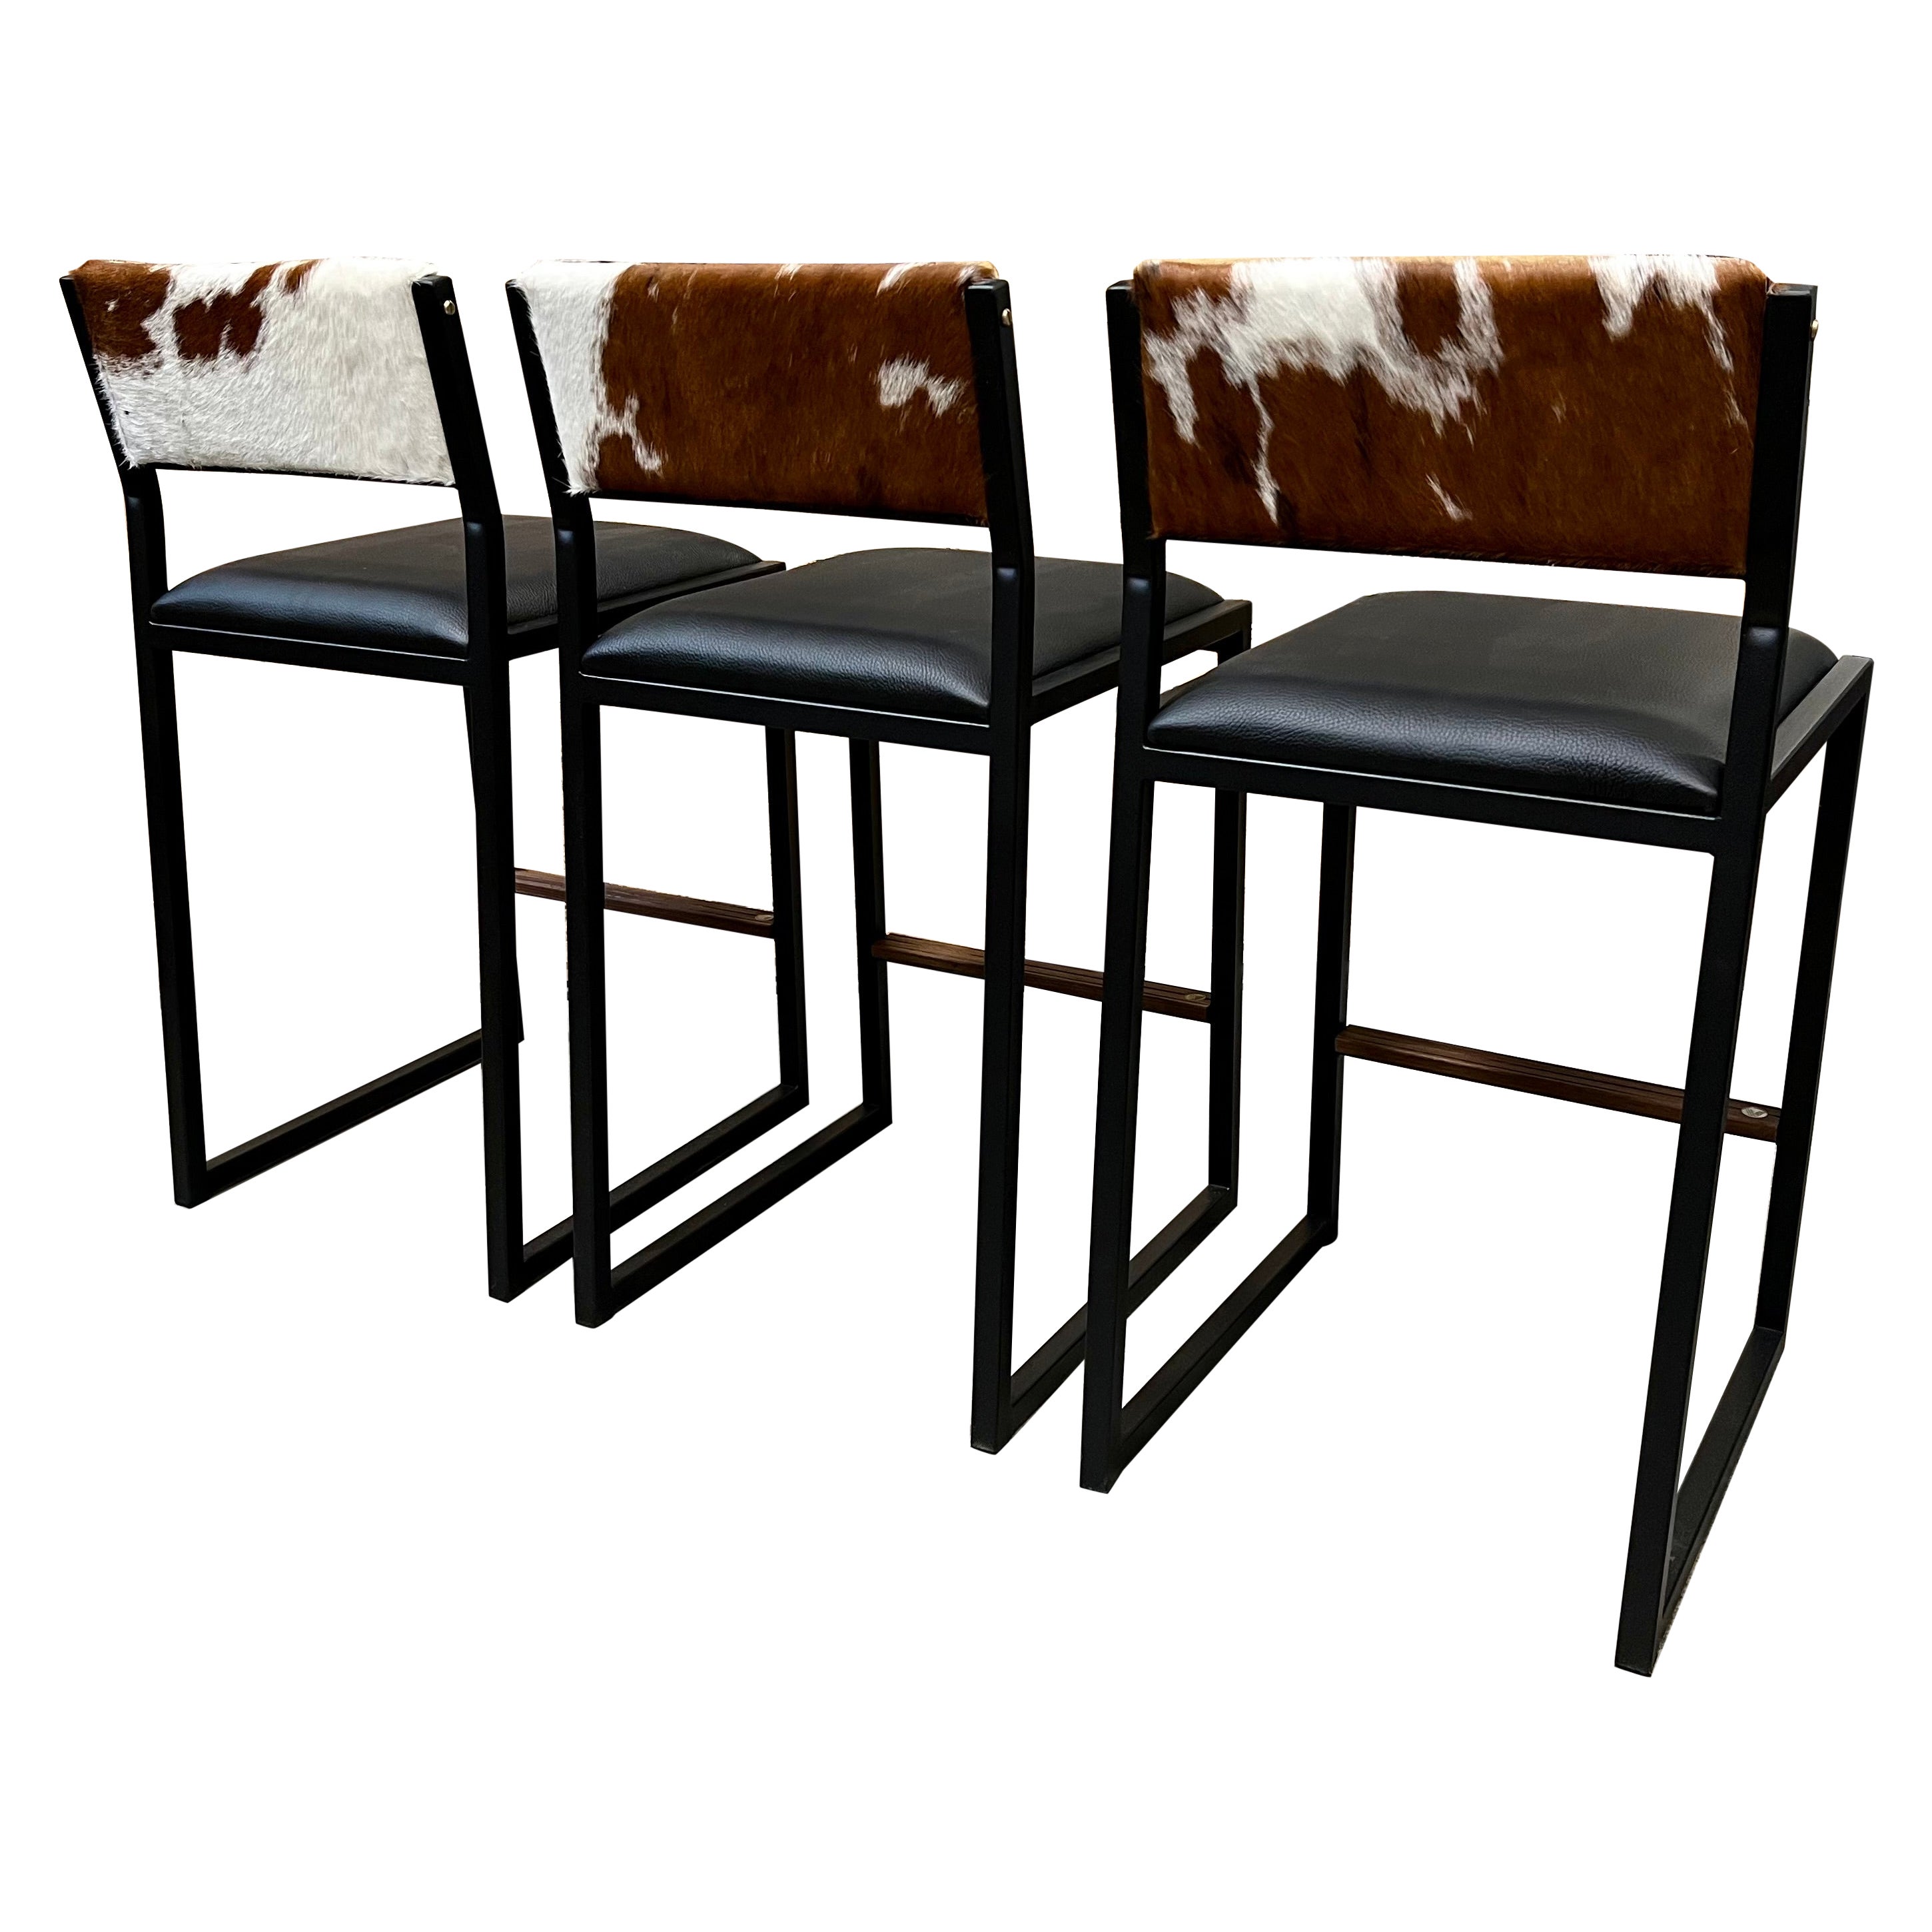 3x Shaker Counterstools, by Ambrozia, Walnut, Black Leather, Brown&White Cowhide For Sale